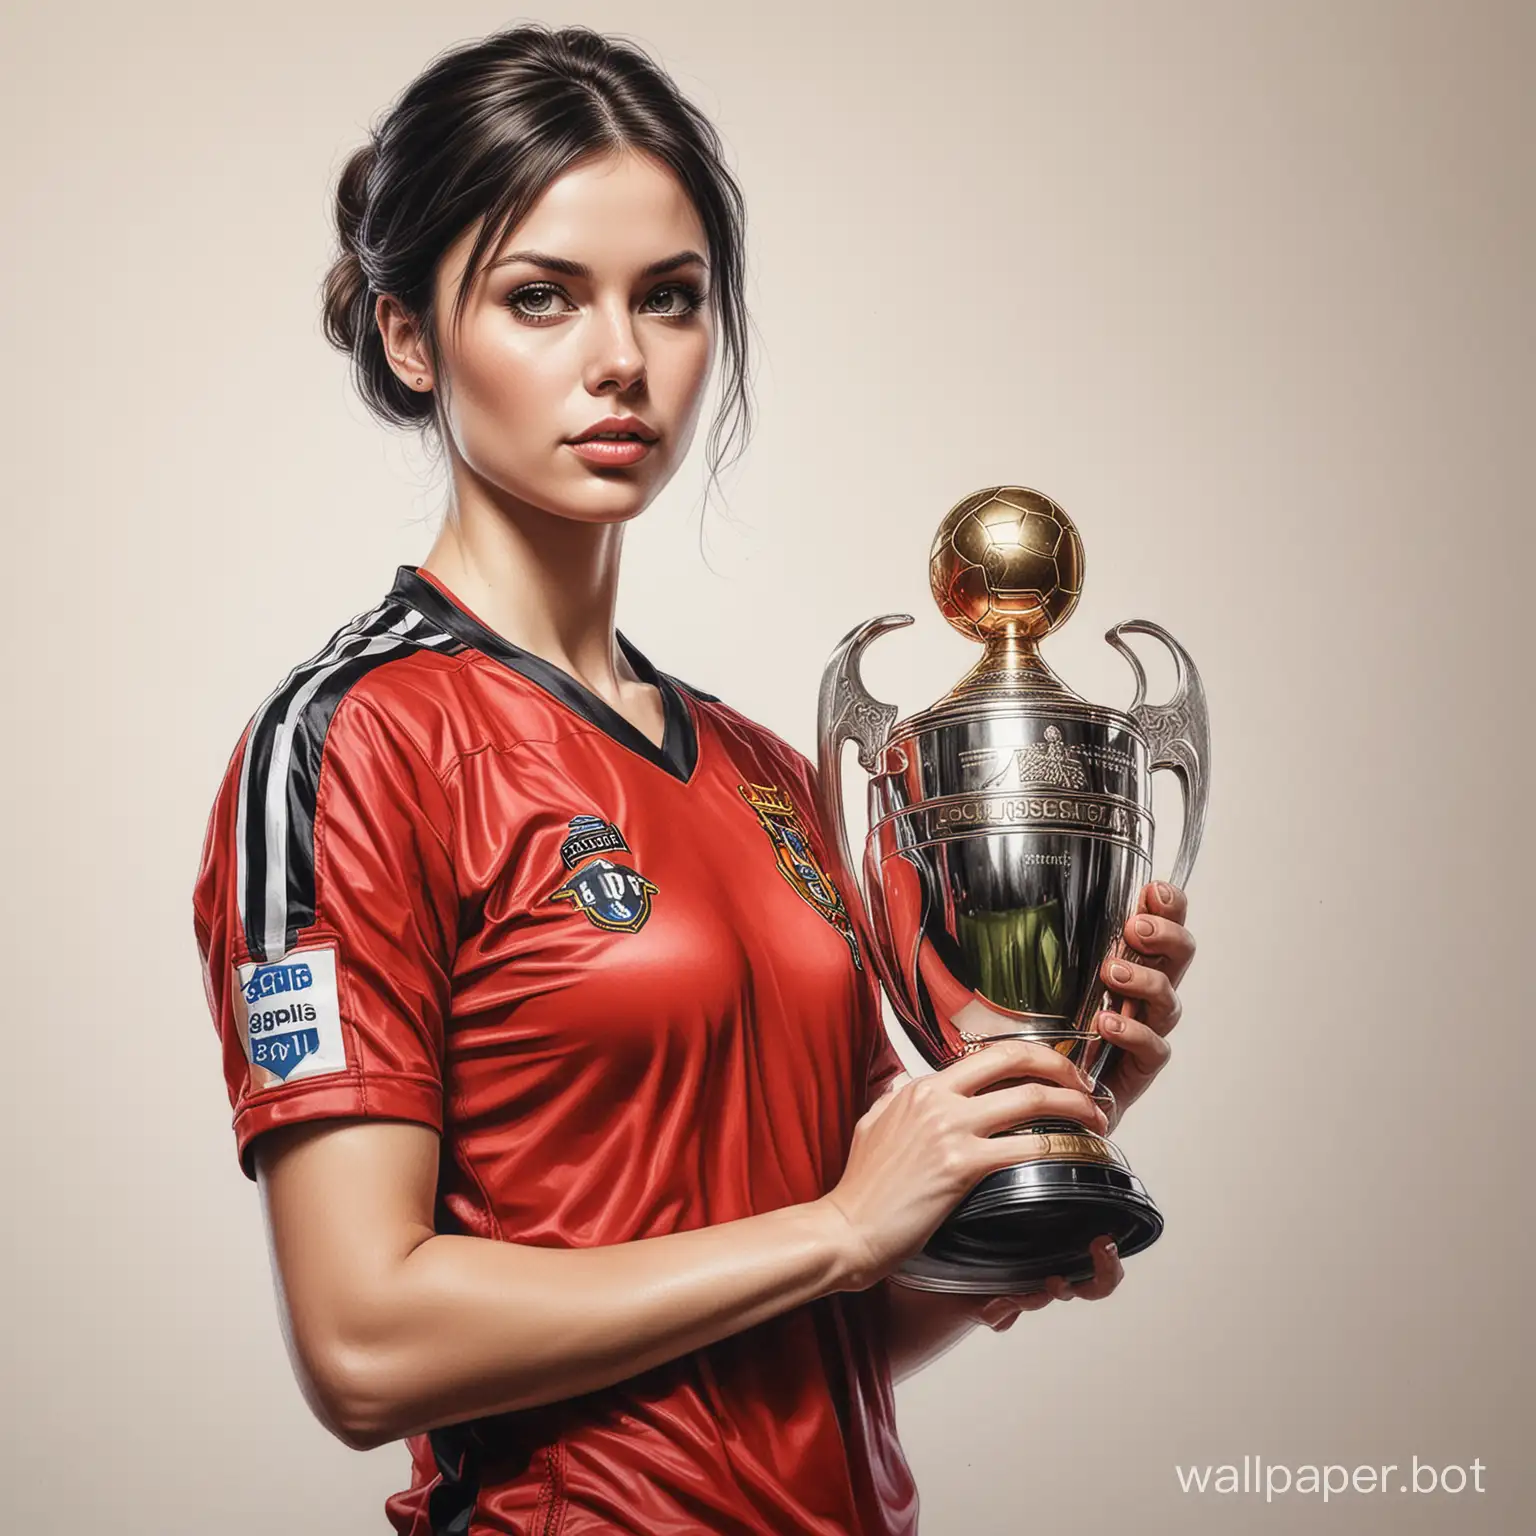 Young-Svetlana-Ivanova-Holding-Champions-Cup-in-Red-and-Black-Football-Kit